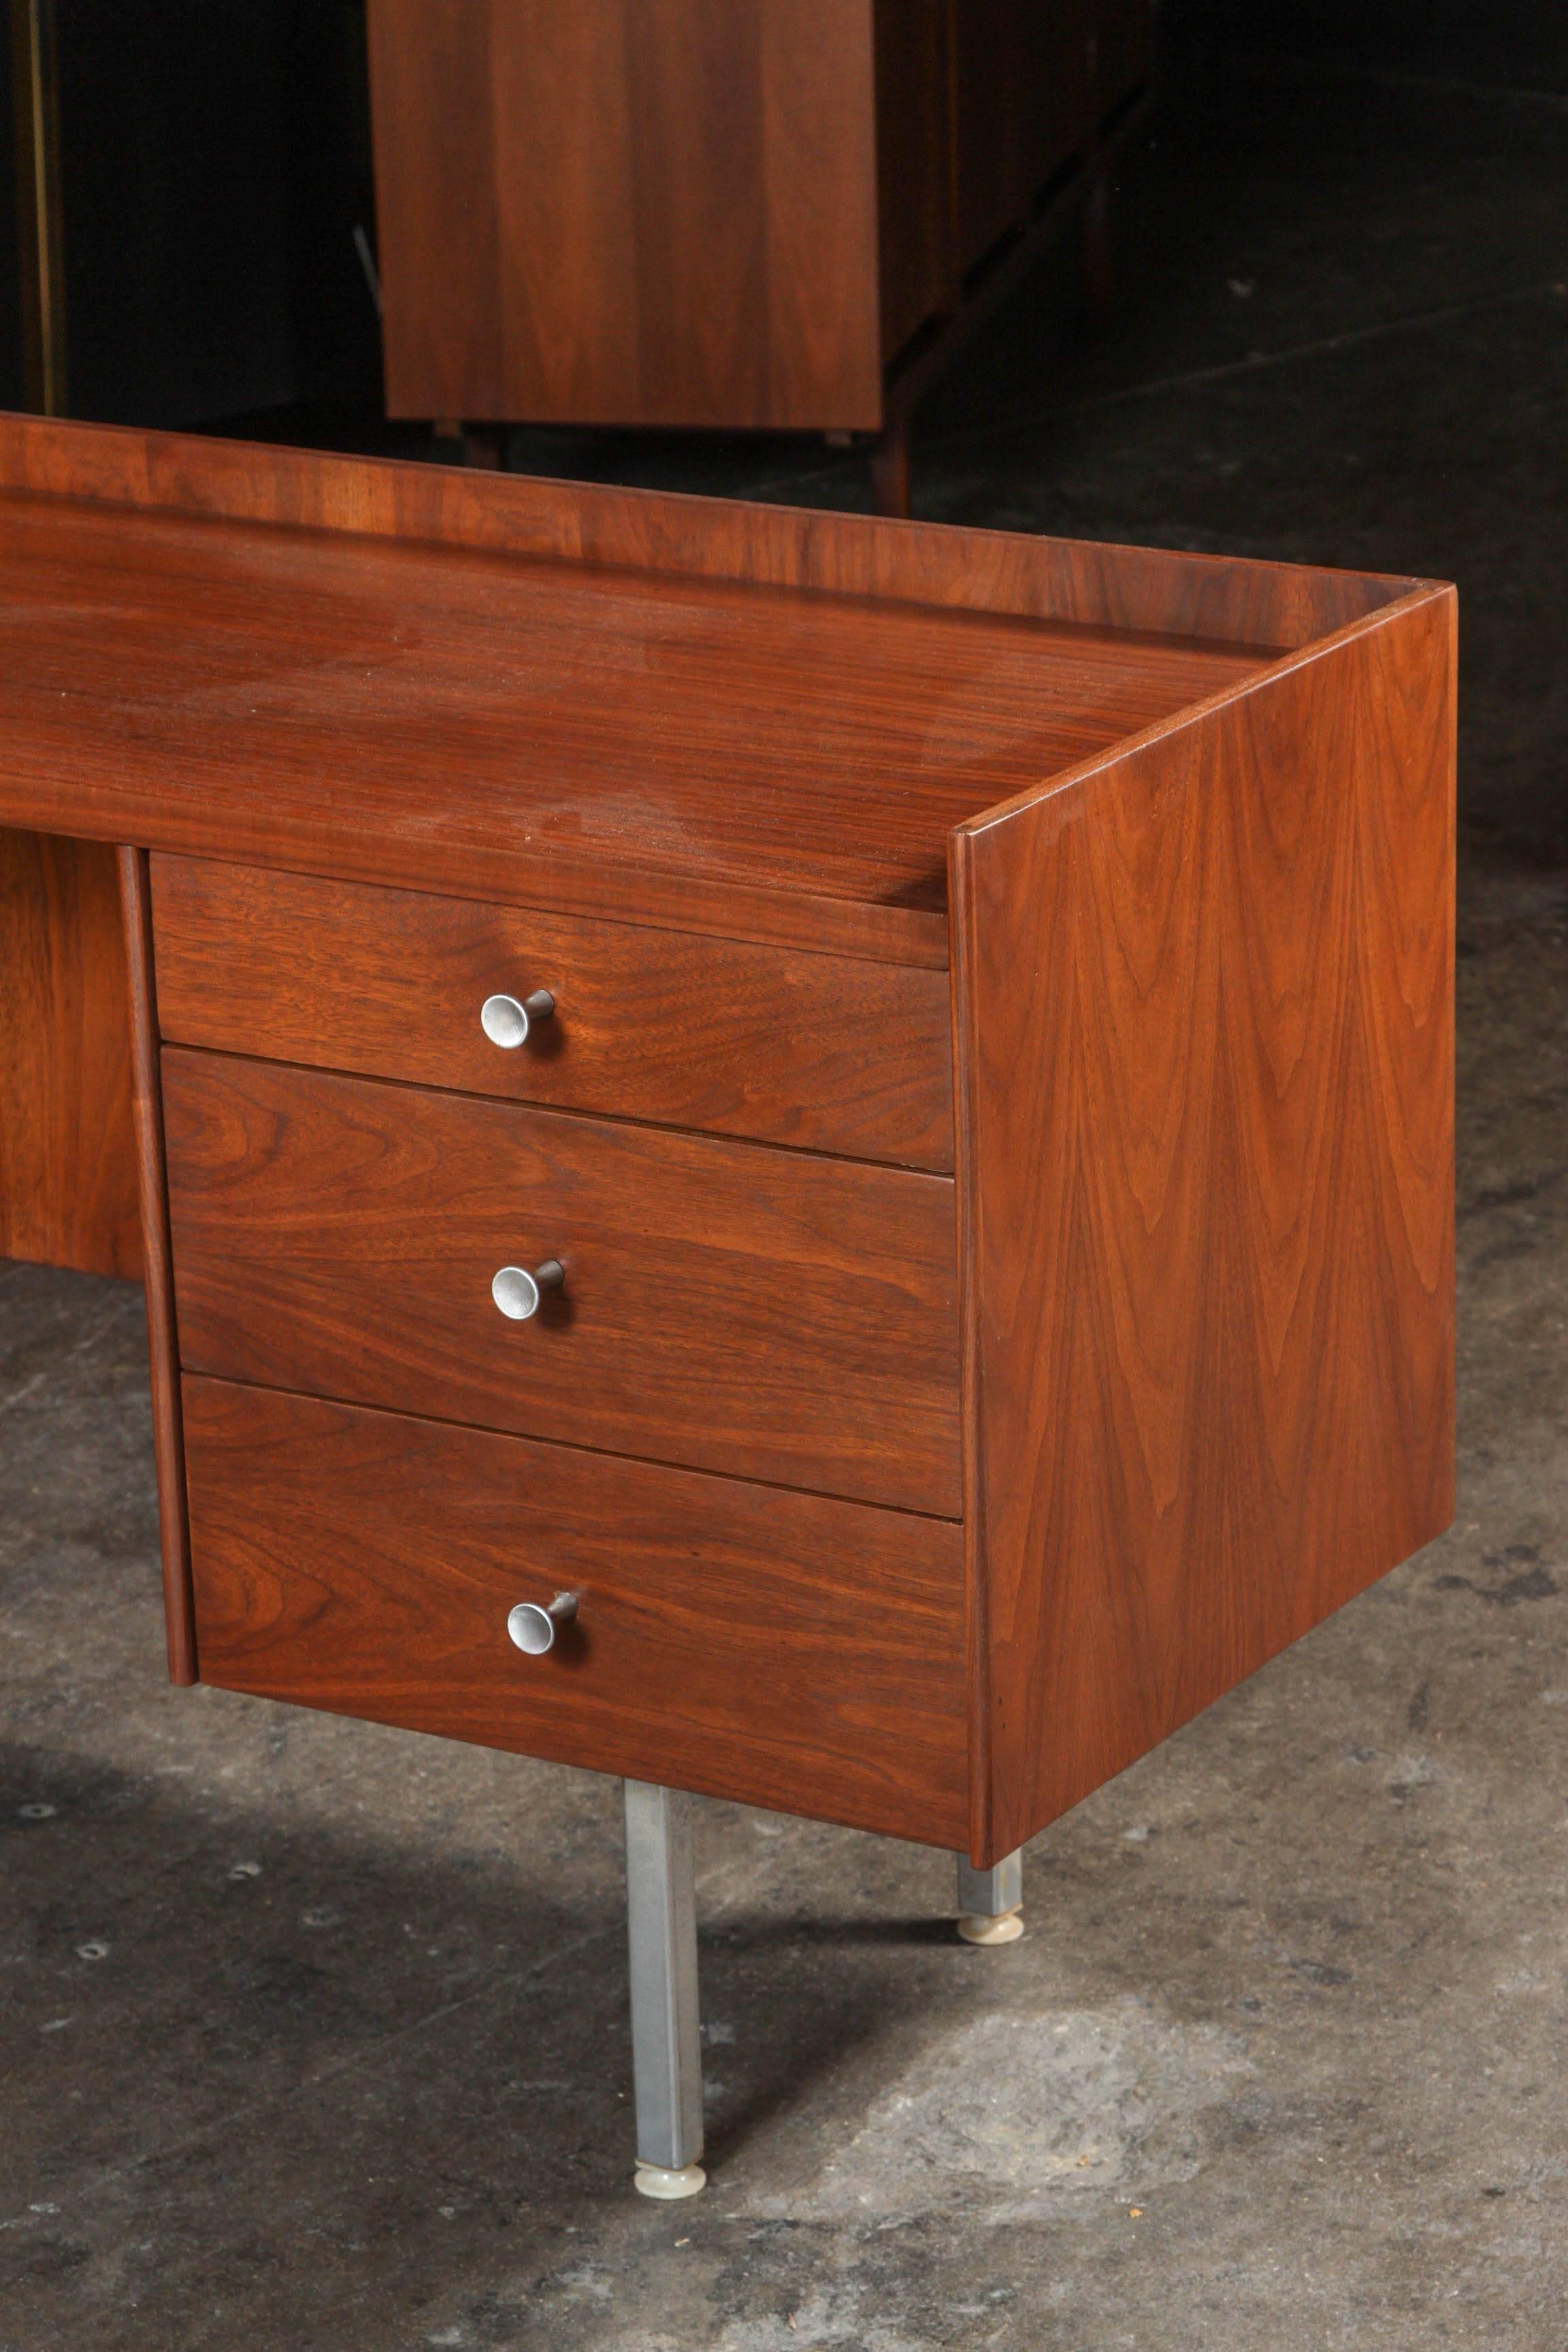 Extremely rare Milo Baughman for Glenn of California refinished walnut executive desk. Newly refinished. Walnut wood, side return, original stainless sculpted knobs, finished on both sides so you can float it in a room, this was a custom order piece